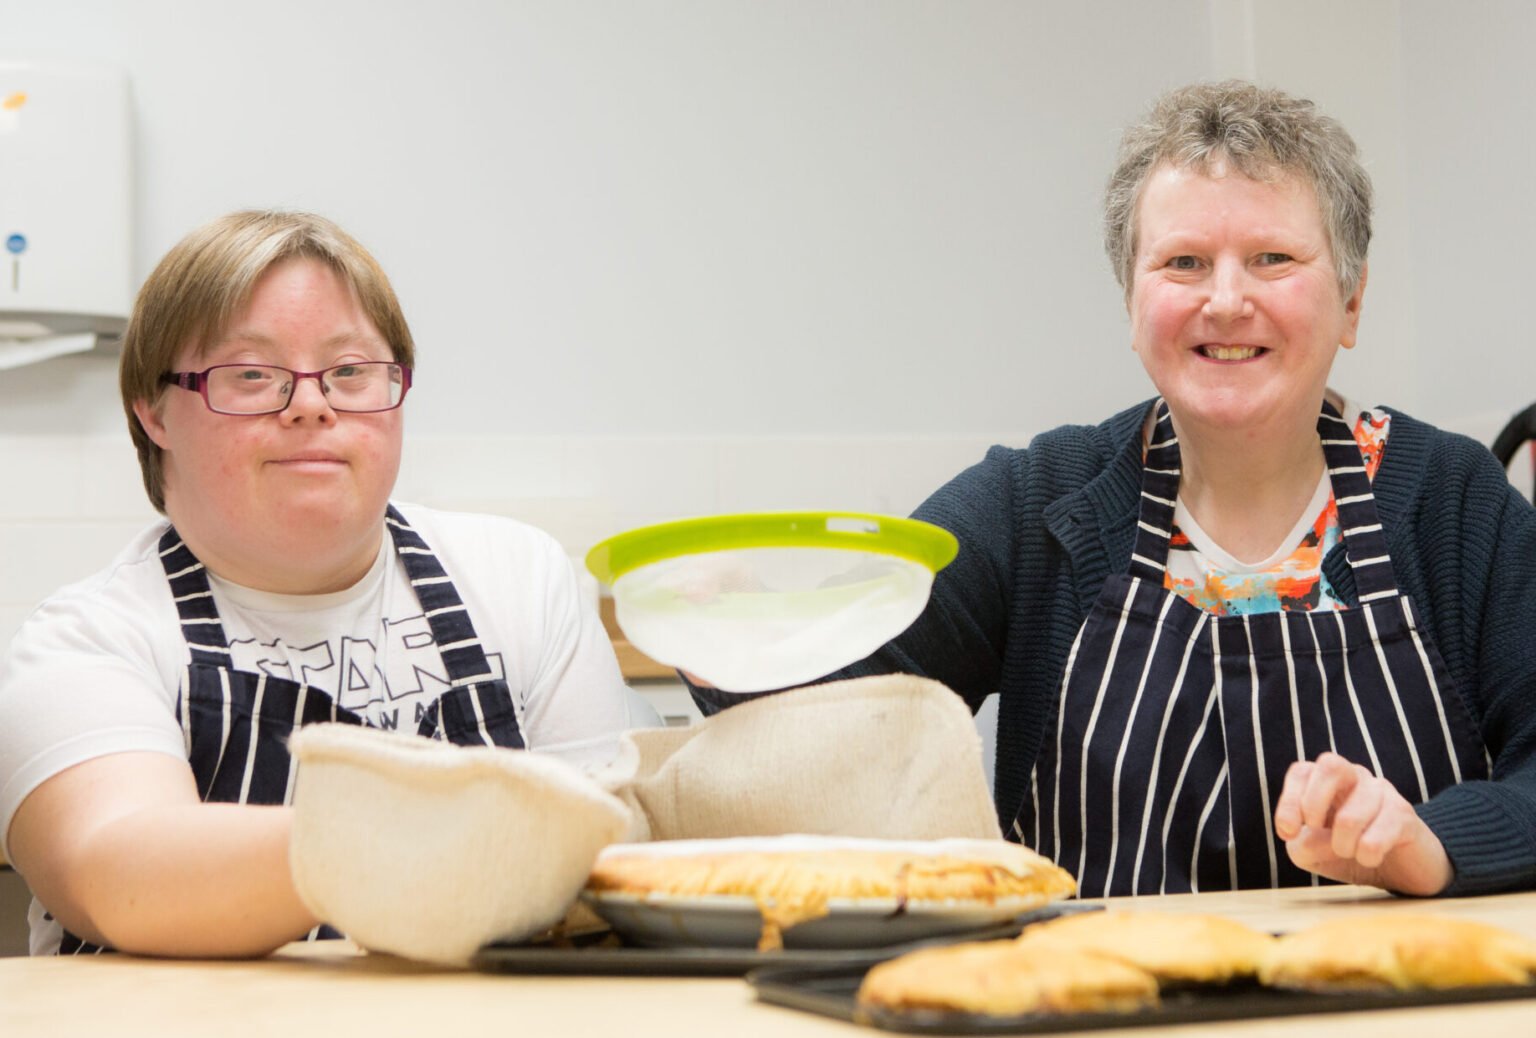 A woman and her carer, baking and smiling at the camara